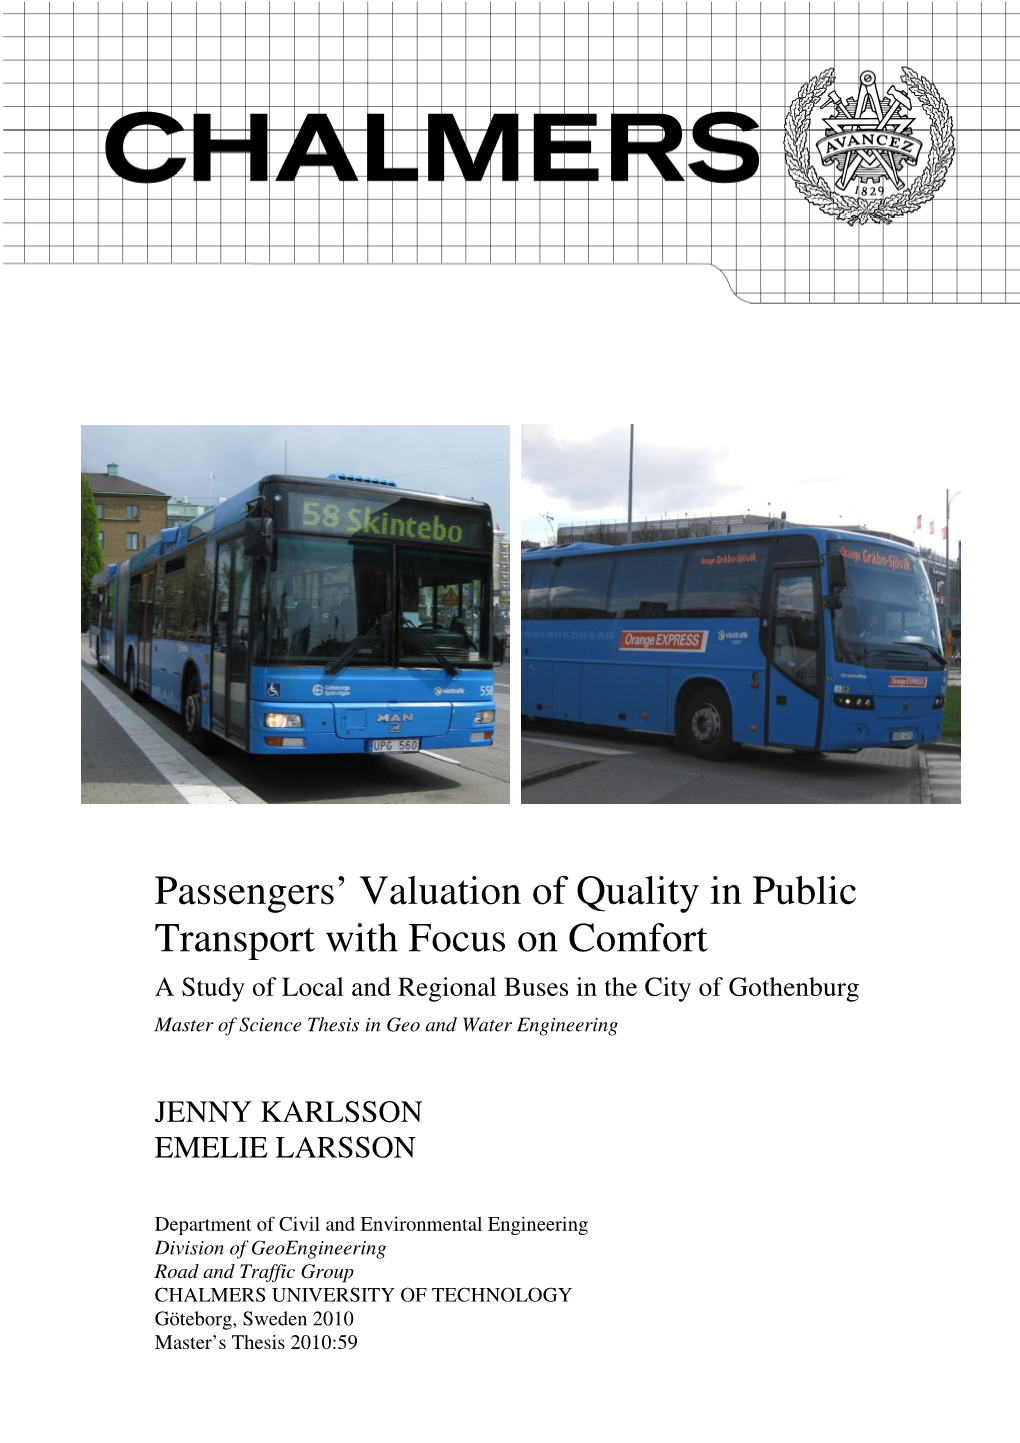 Passengers' Valuation of Quality in Public Transport with Focus On